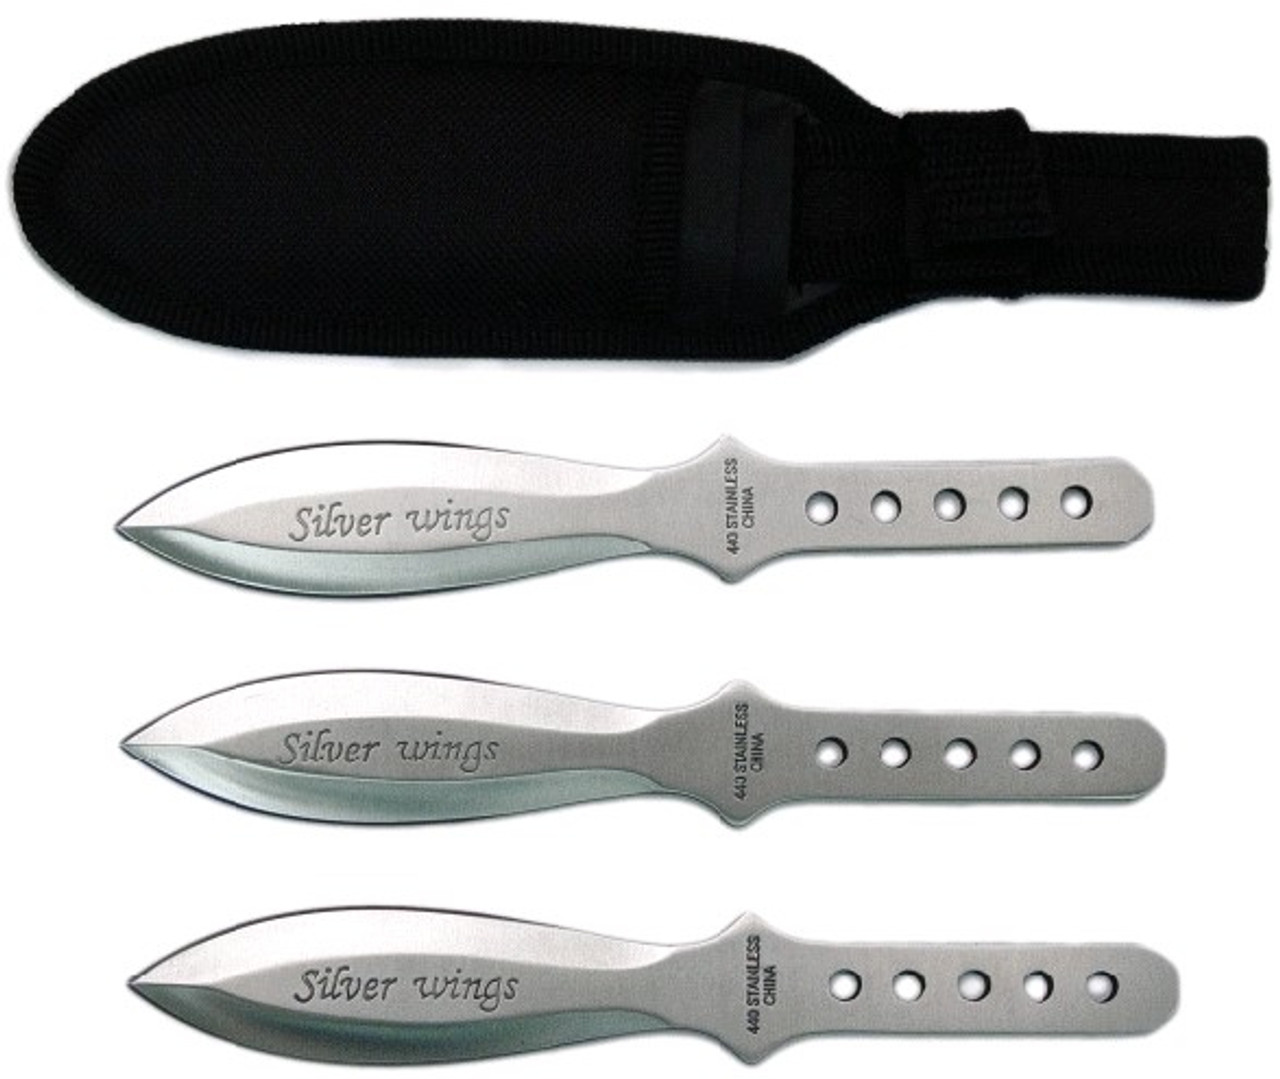 3 Pcs 6 75 440 Stainless Steel Throwers Throwing Knives With Sheath